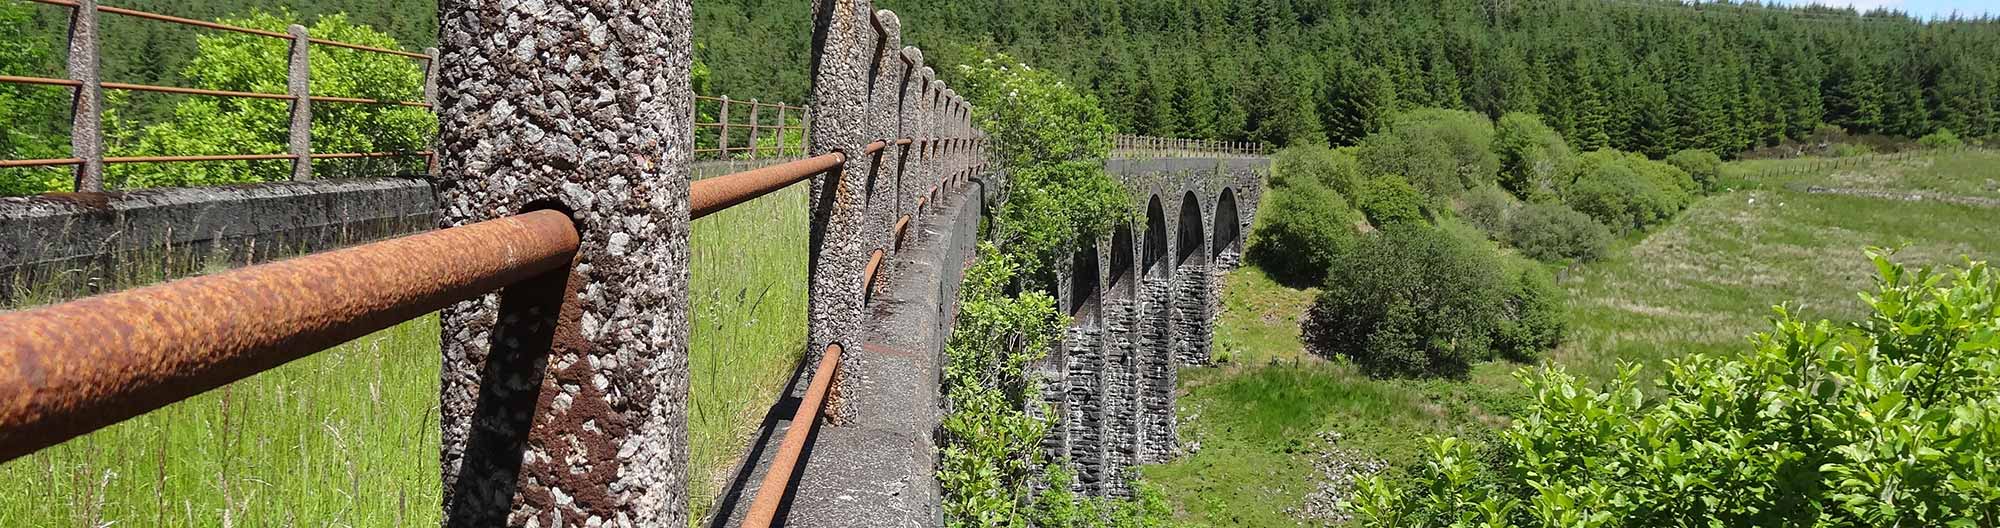 Cwm Prysor Viaduct from the Top